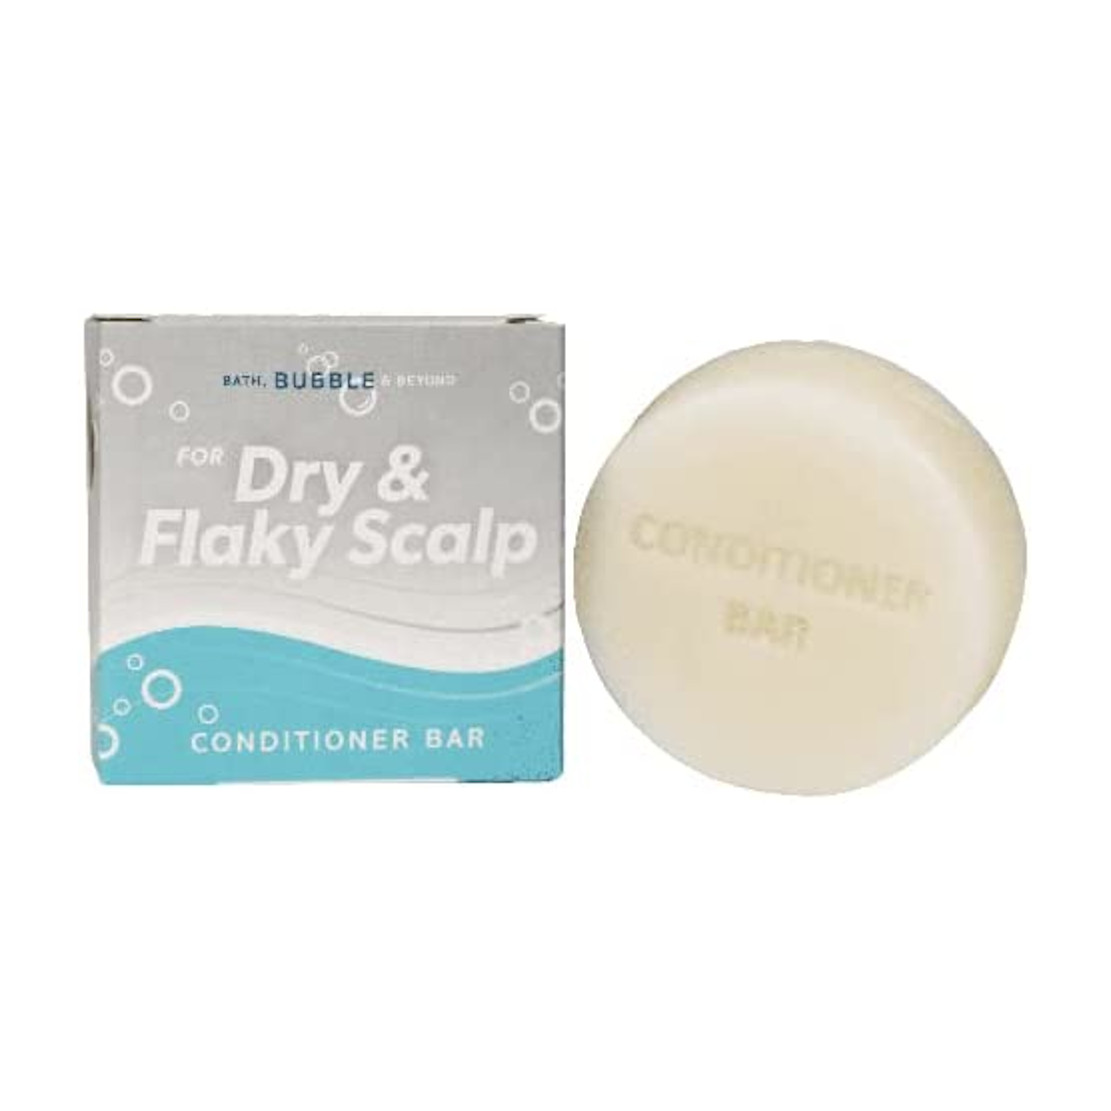 Bath Bubble and Beyond Dry & Flaky Scalp Conditioner Bar